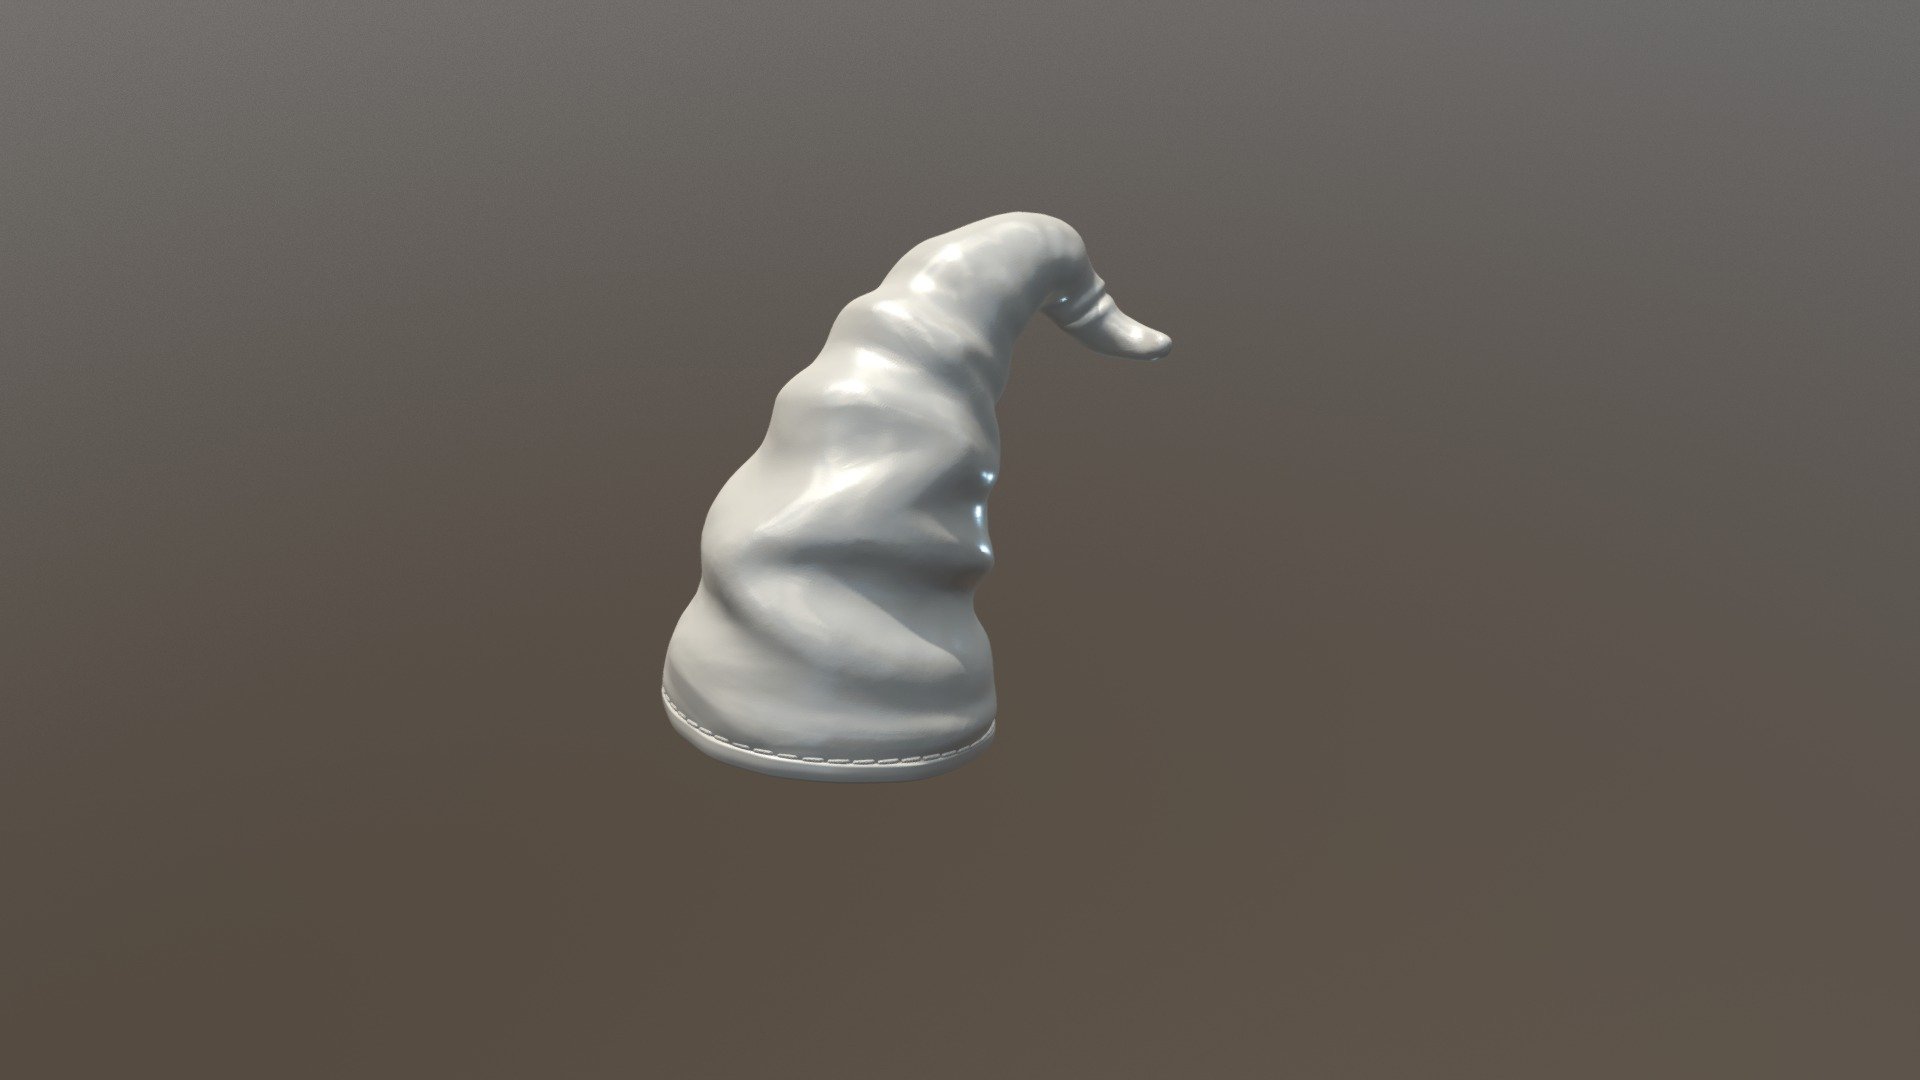 High Poly Gnome Cap.

Measure units are meters, size is about 27 cm in length. Model is print ready.

Mesh is manifold, has no bad contiguous edges.

Available formats: .blend, .fbx, .stl, .obj, .dae, .3ds

Faces count: 392820
For .3ds there is 62850 triangular faces - Gnome Cap HP - Buy Royalty Free 3D model by Skazok 3d model